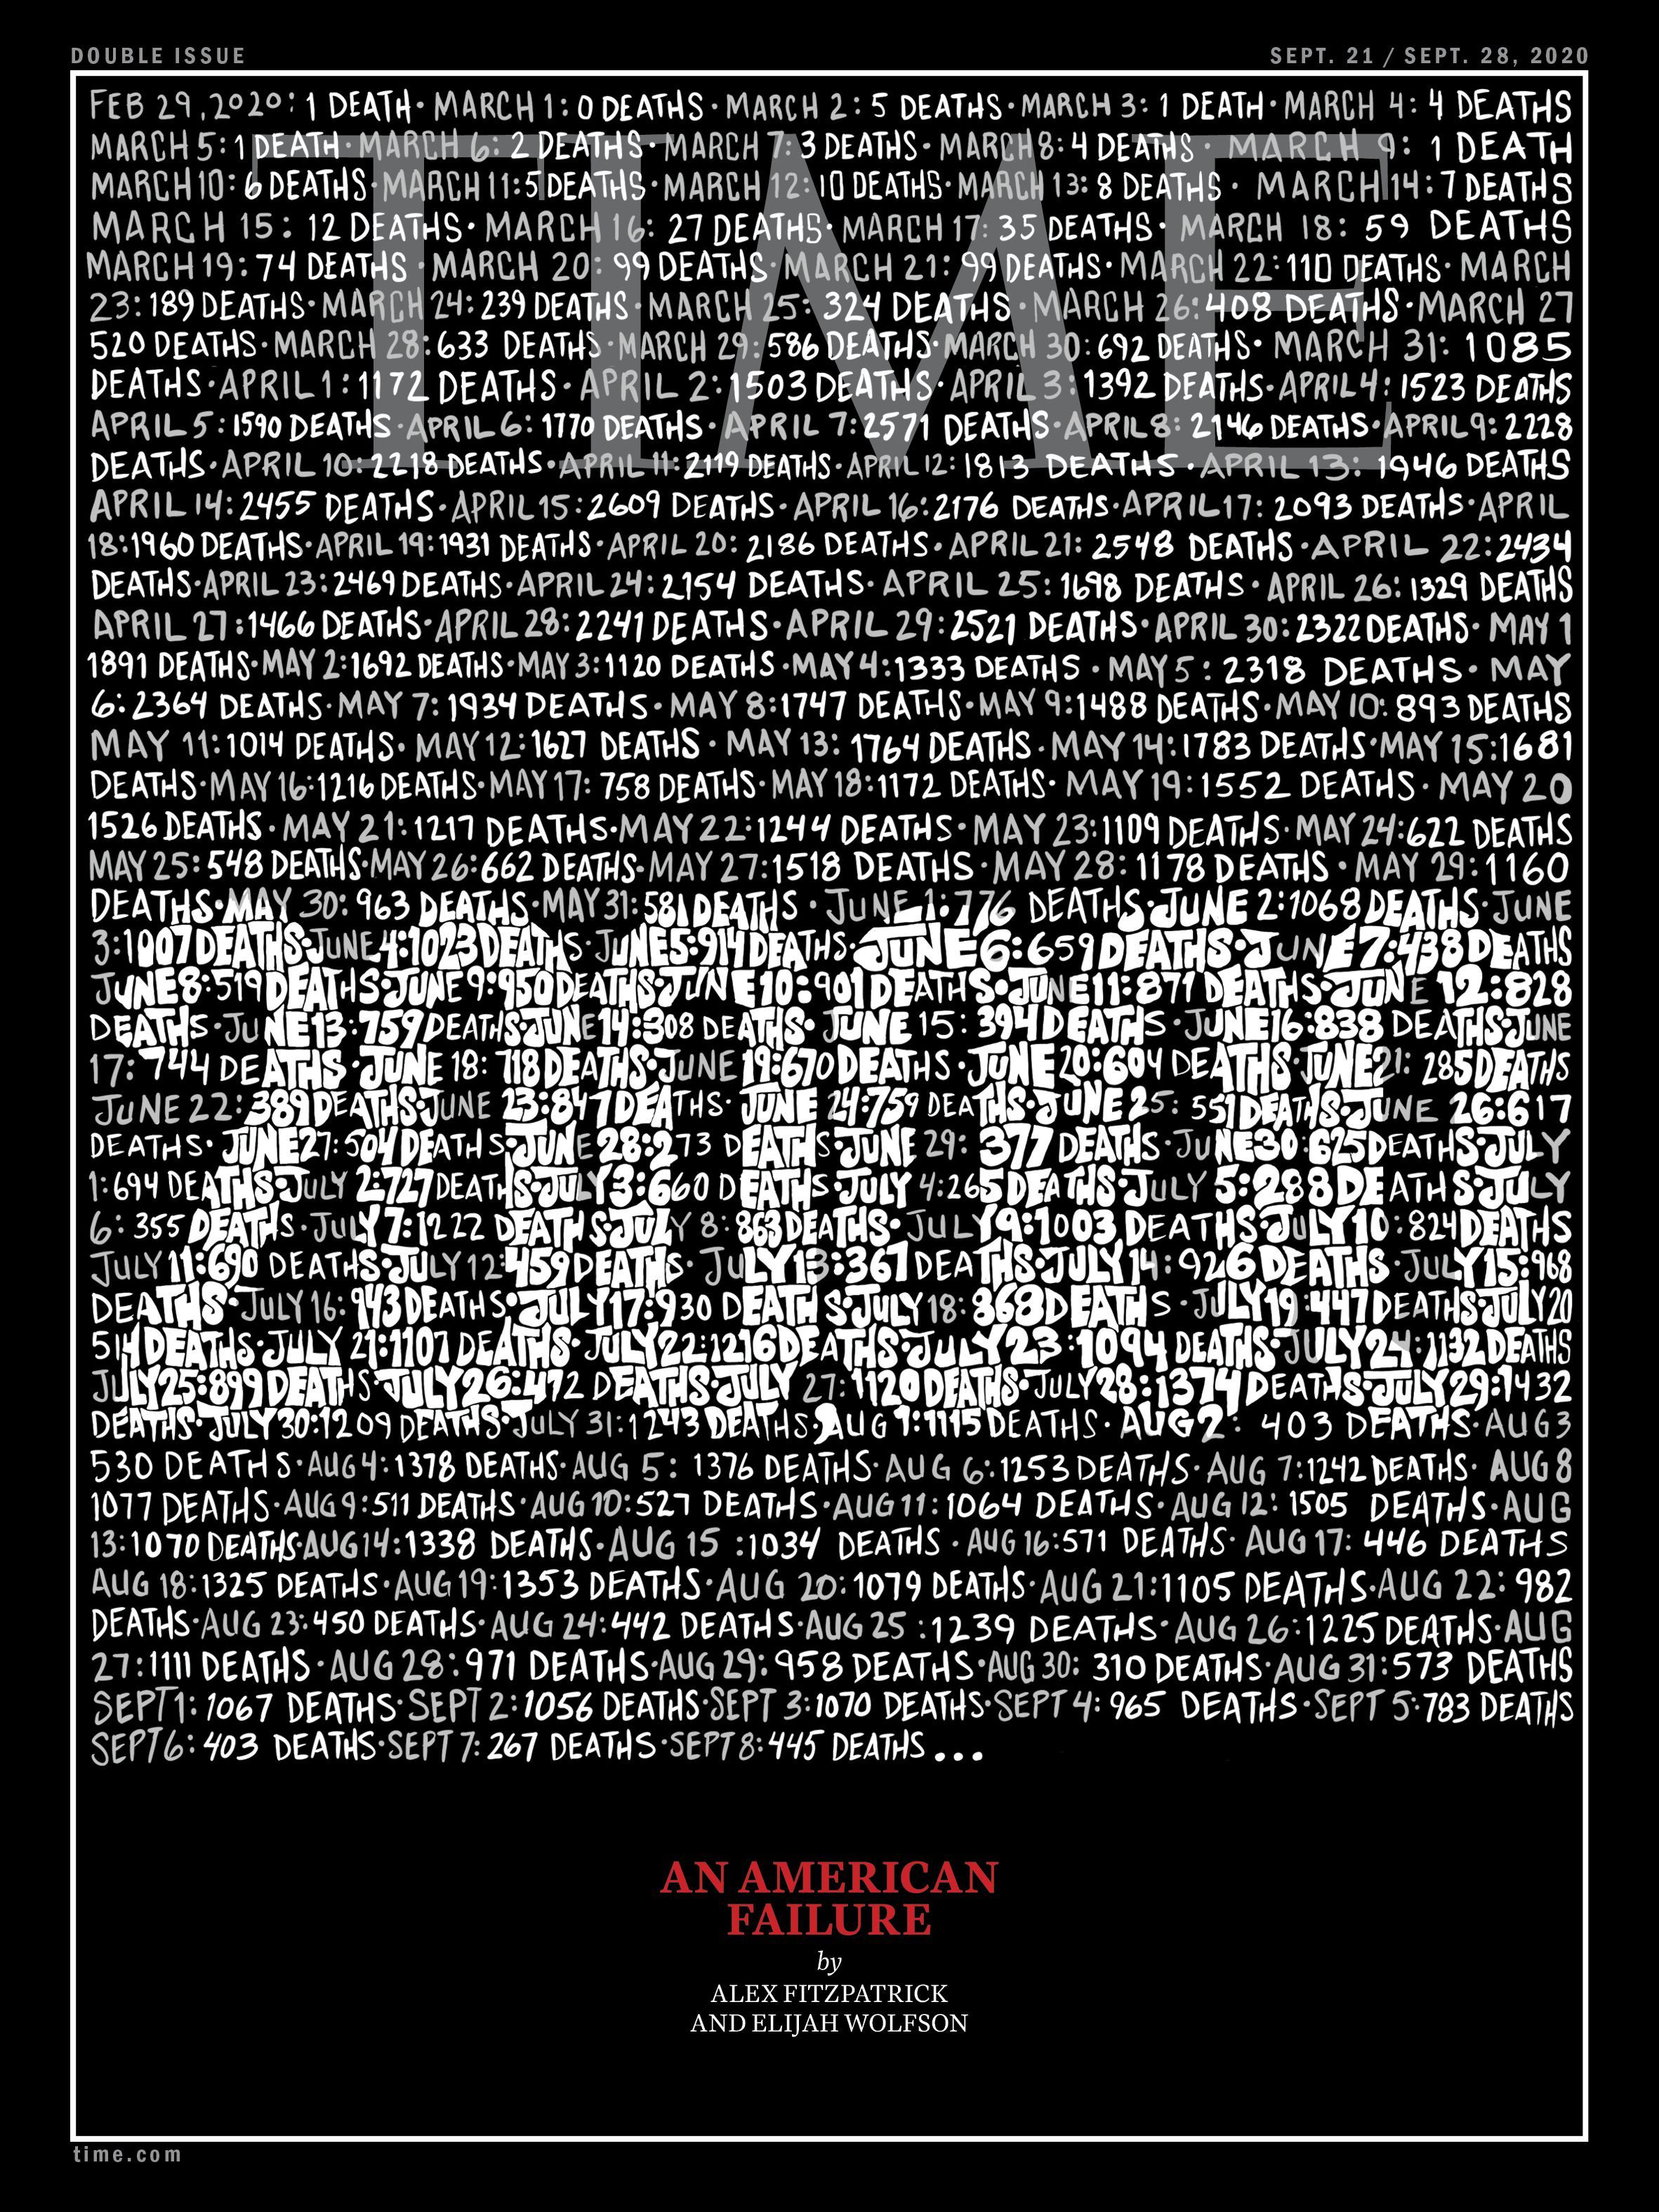 TIME Magazine cover